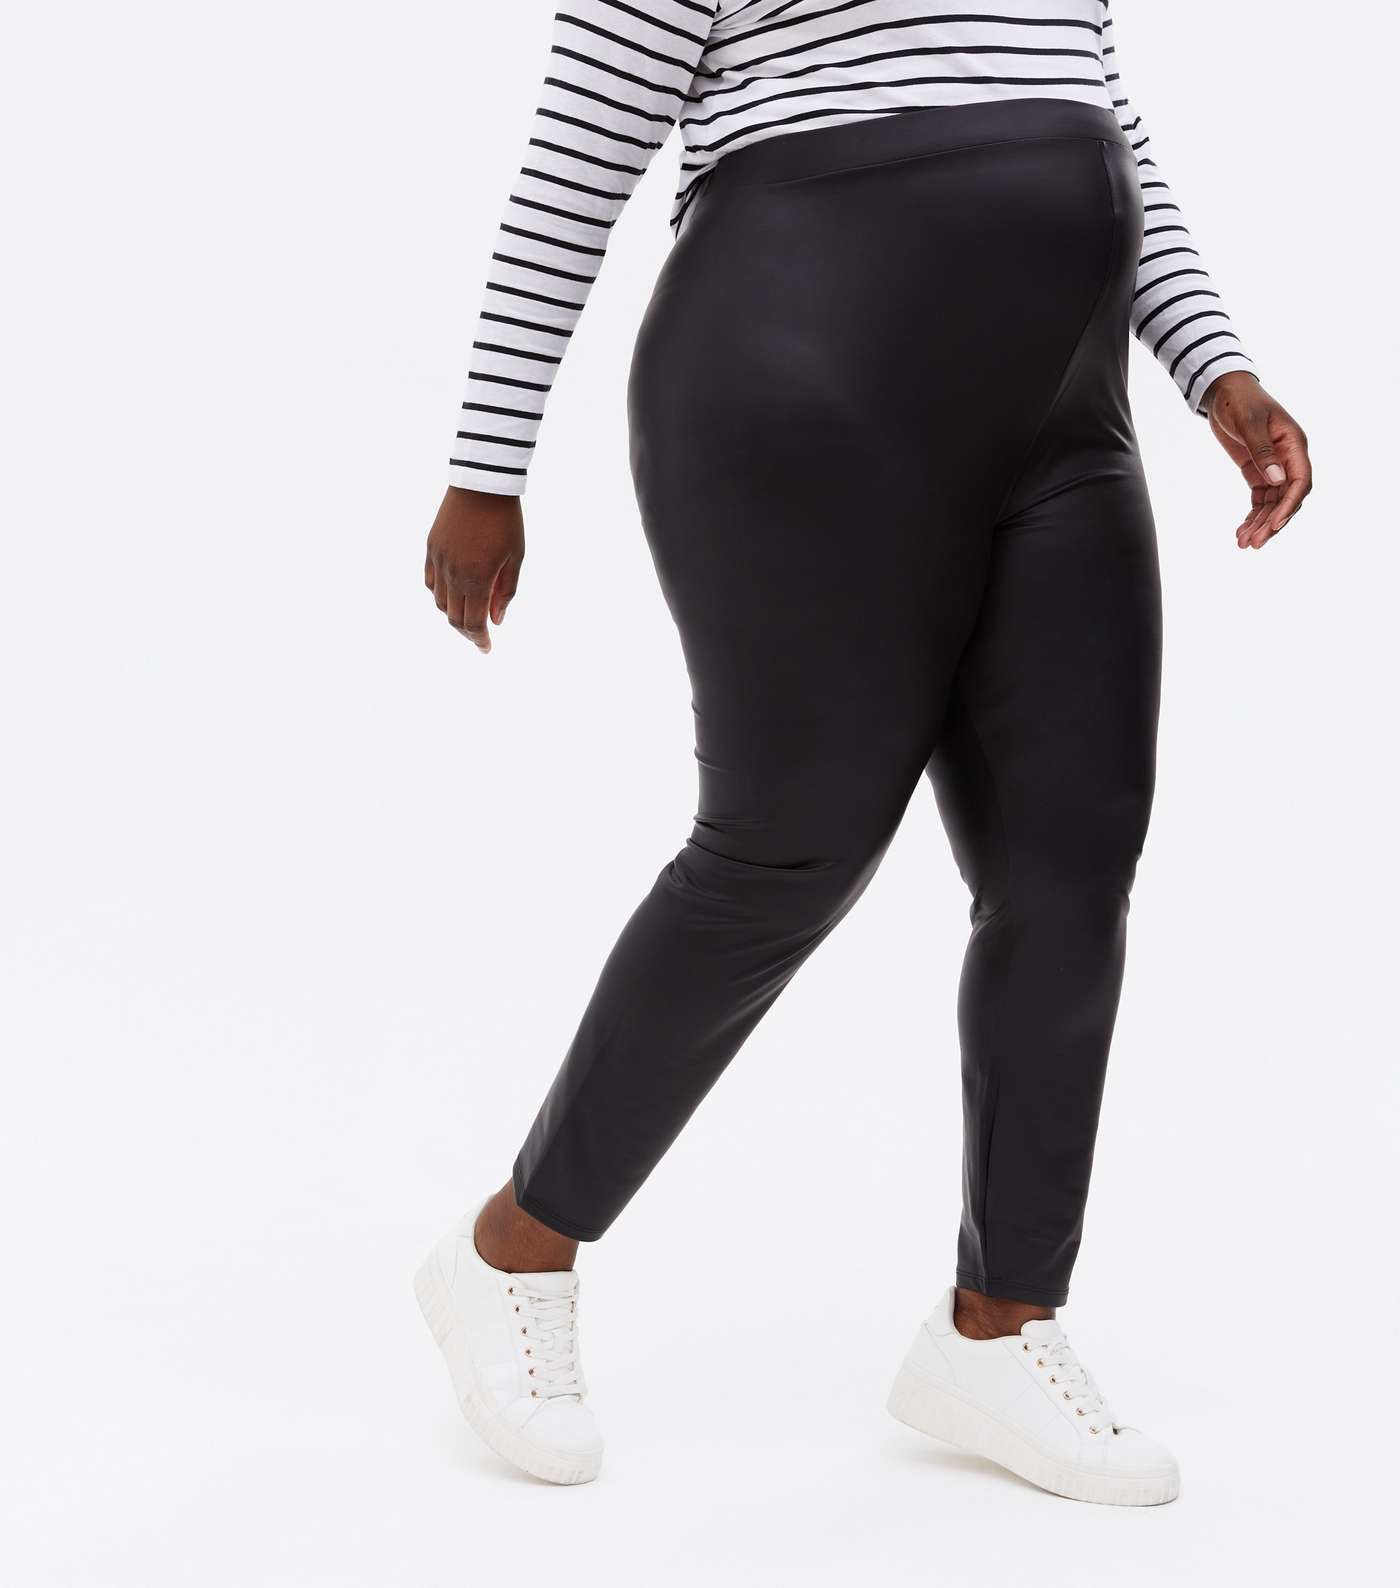 Curves Maternity Black Leather-Look Over Bump Leggings Image 3